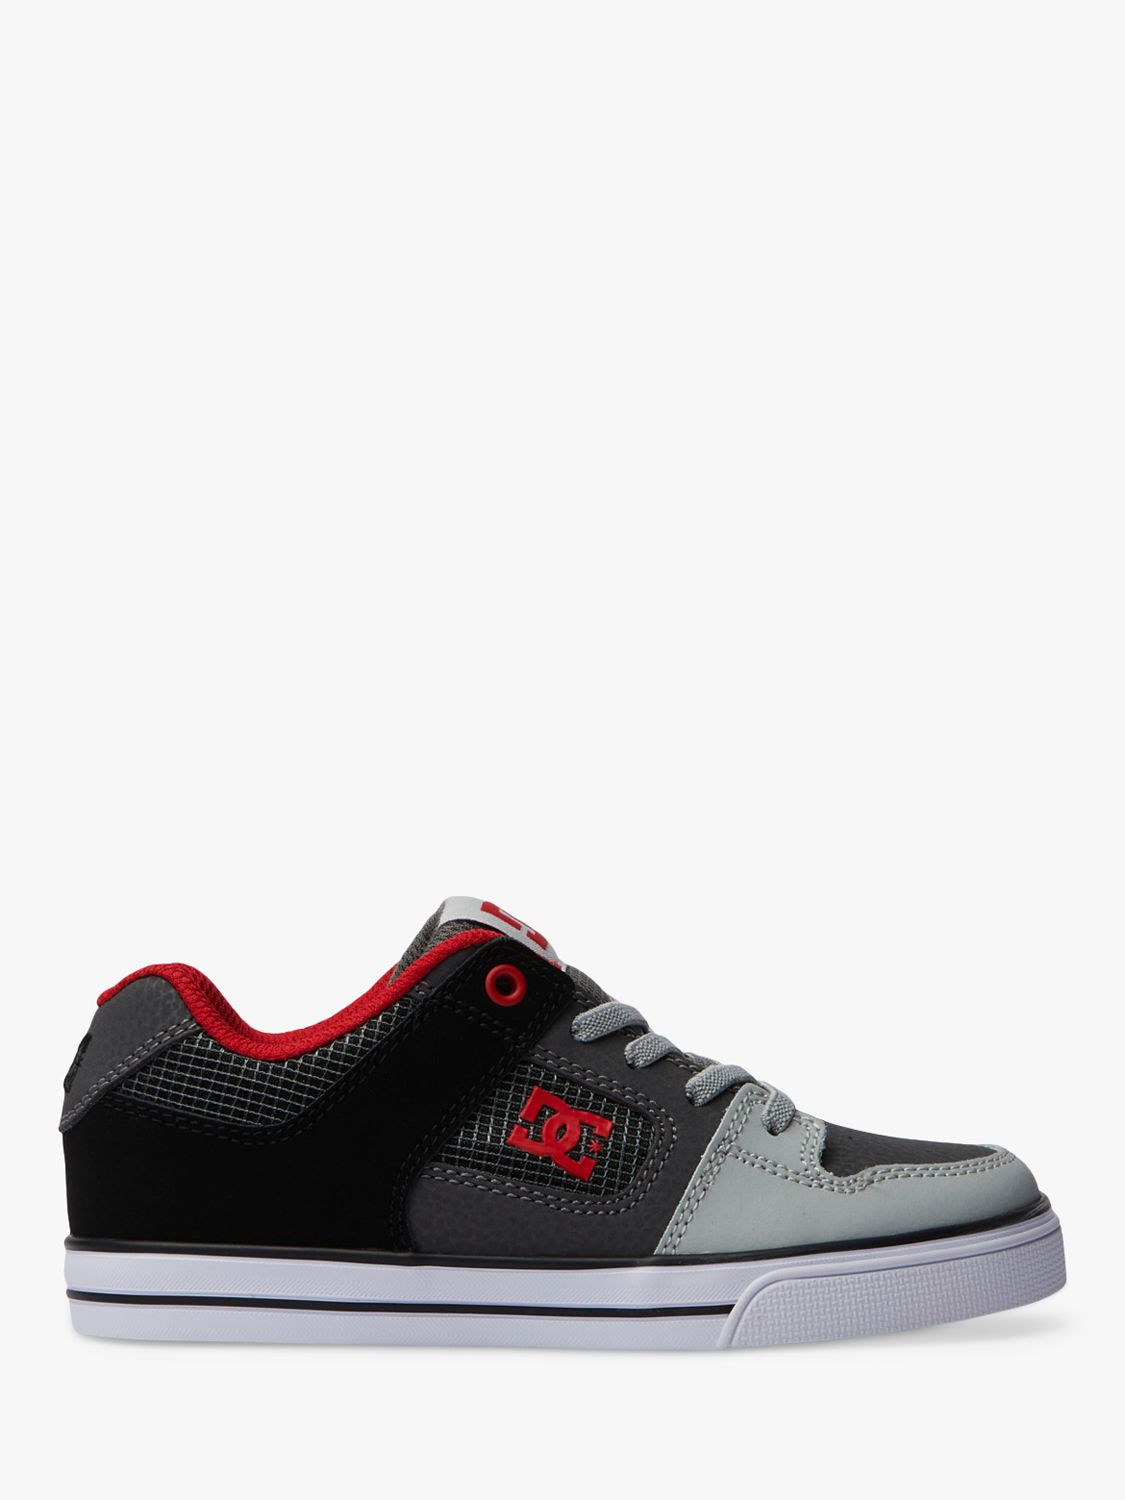 DC Shoes Kids' Leather Pure Elastic Trainers, Grey/Red/Multi, 2